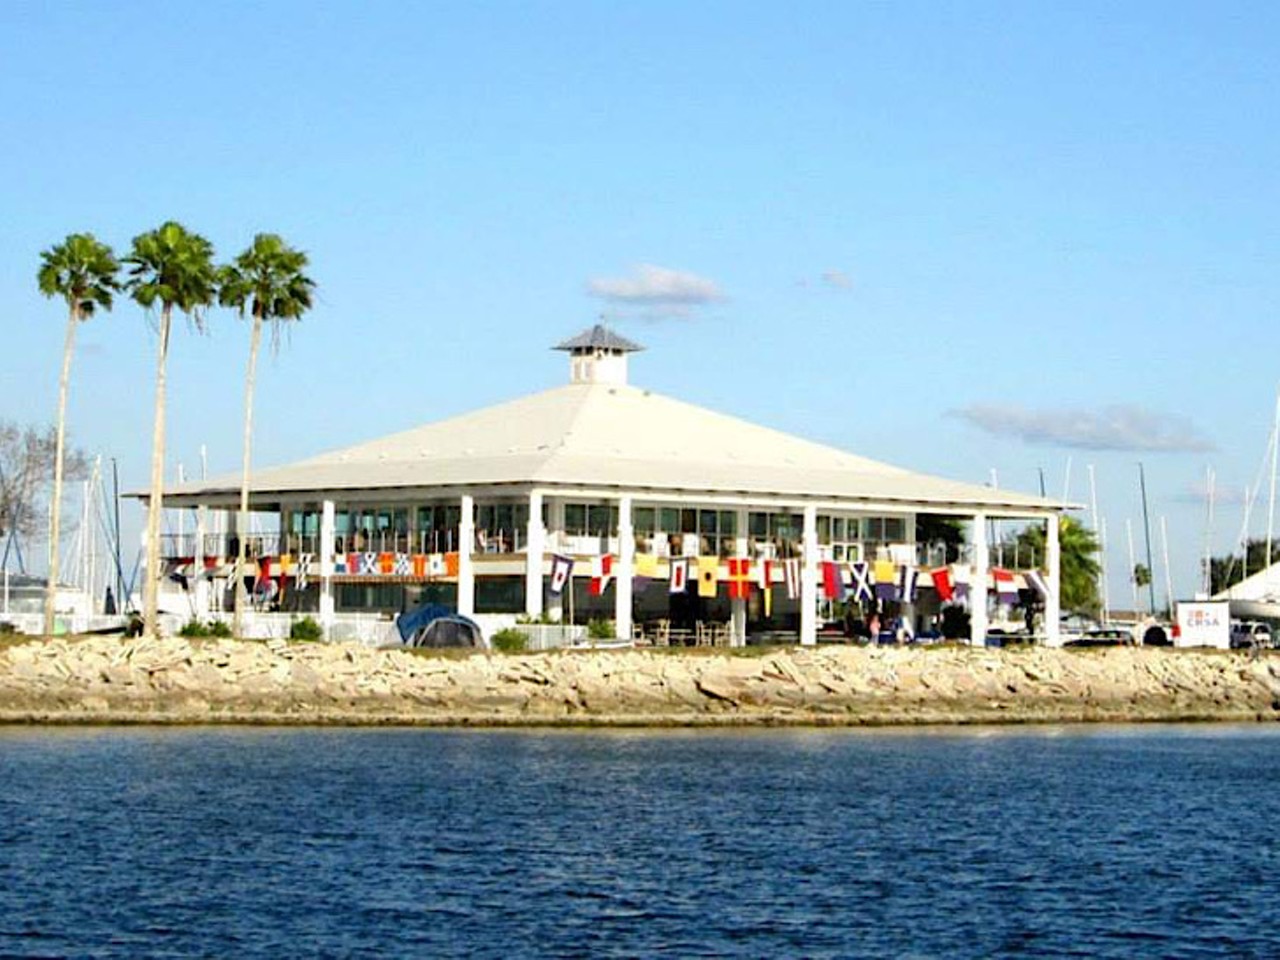 Davis Island Yacht Club  
1315 Severn Ave, Tampa
The member-owned yacht club doubles as a bar. Situated on the water, the second story is where guests will find daily food and drink specials. There are events almost daily, including sailing races and trivia night.
Photo via Photo via Facebook/Davis Island Yacht Club